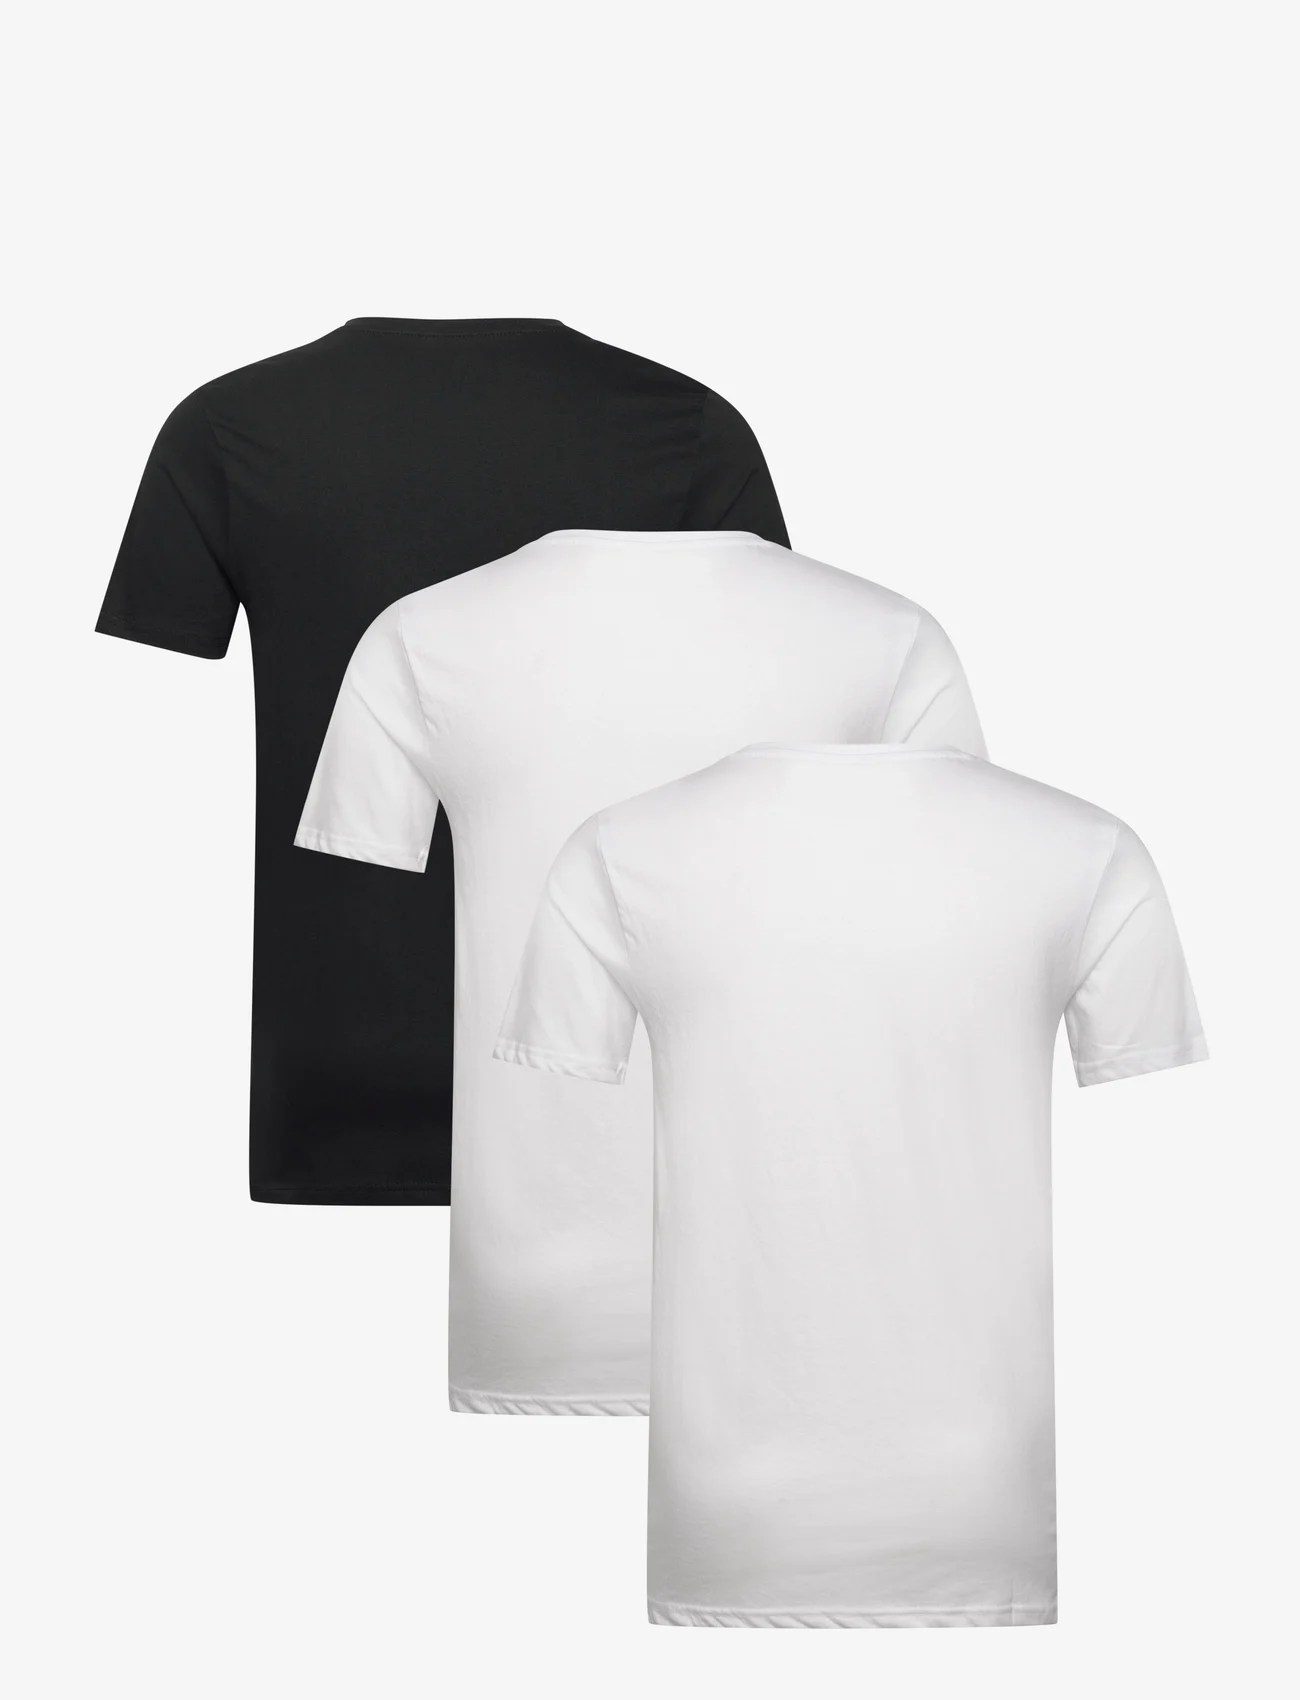 Denim project - 3 PACK T-SHIRTS - lowest prices - 2x white 1x black - 1